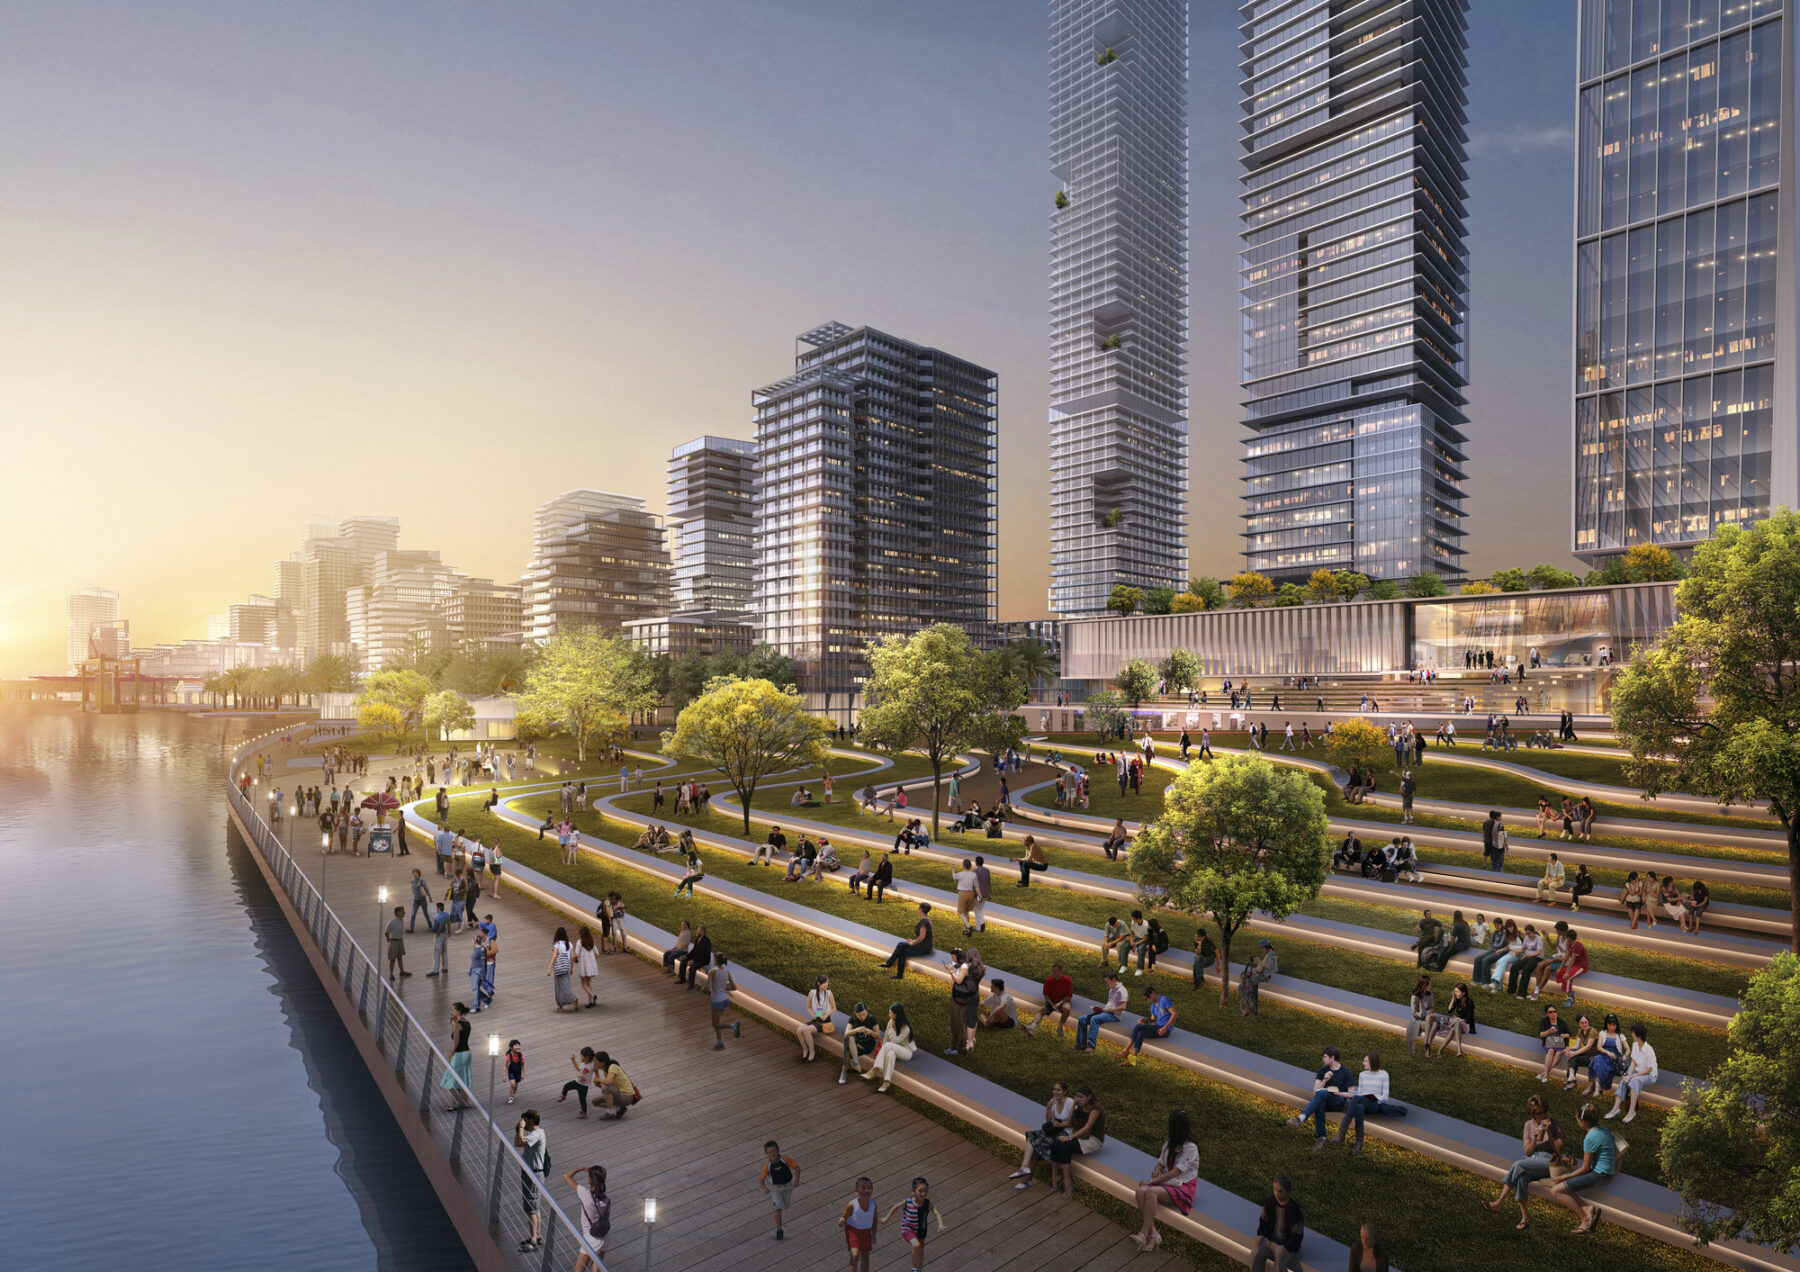 perspective rendering of Saigon Riverfront featuring amphitheater style seating along the waterfront